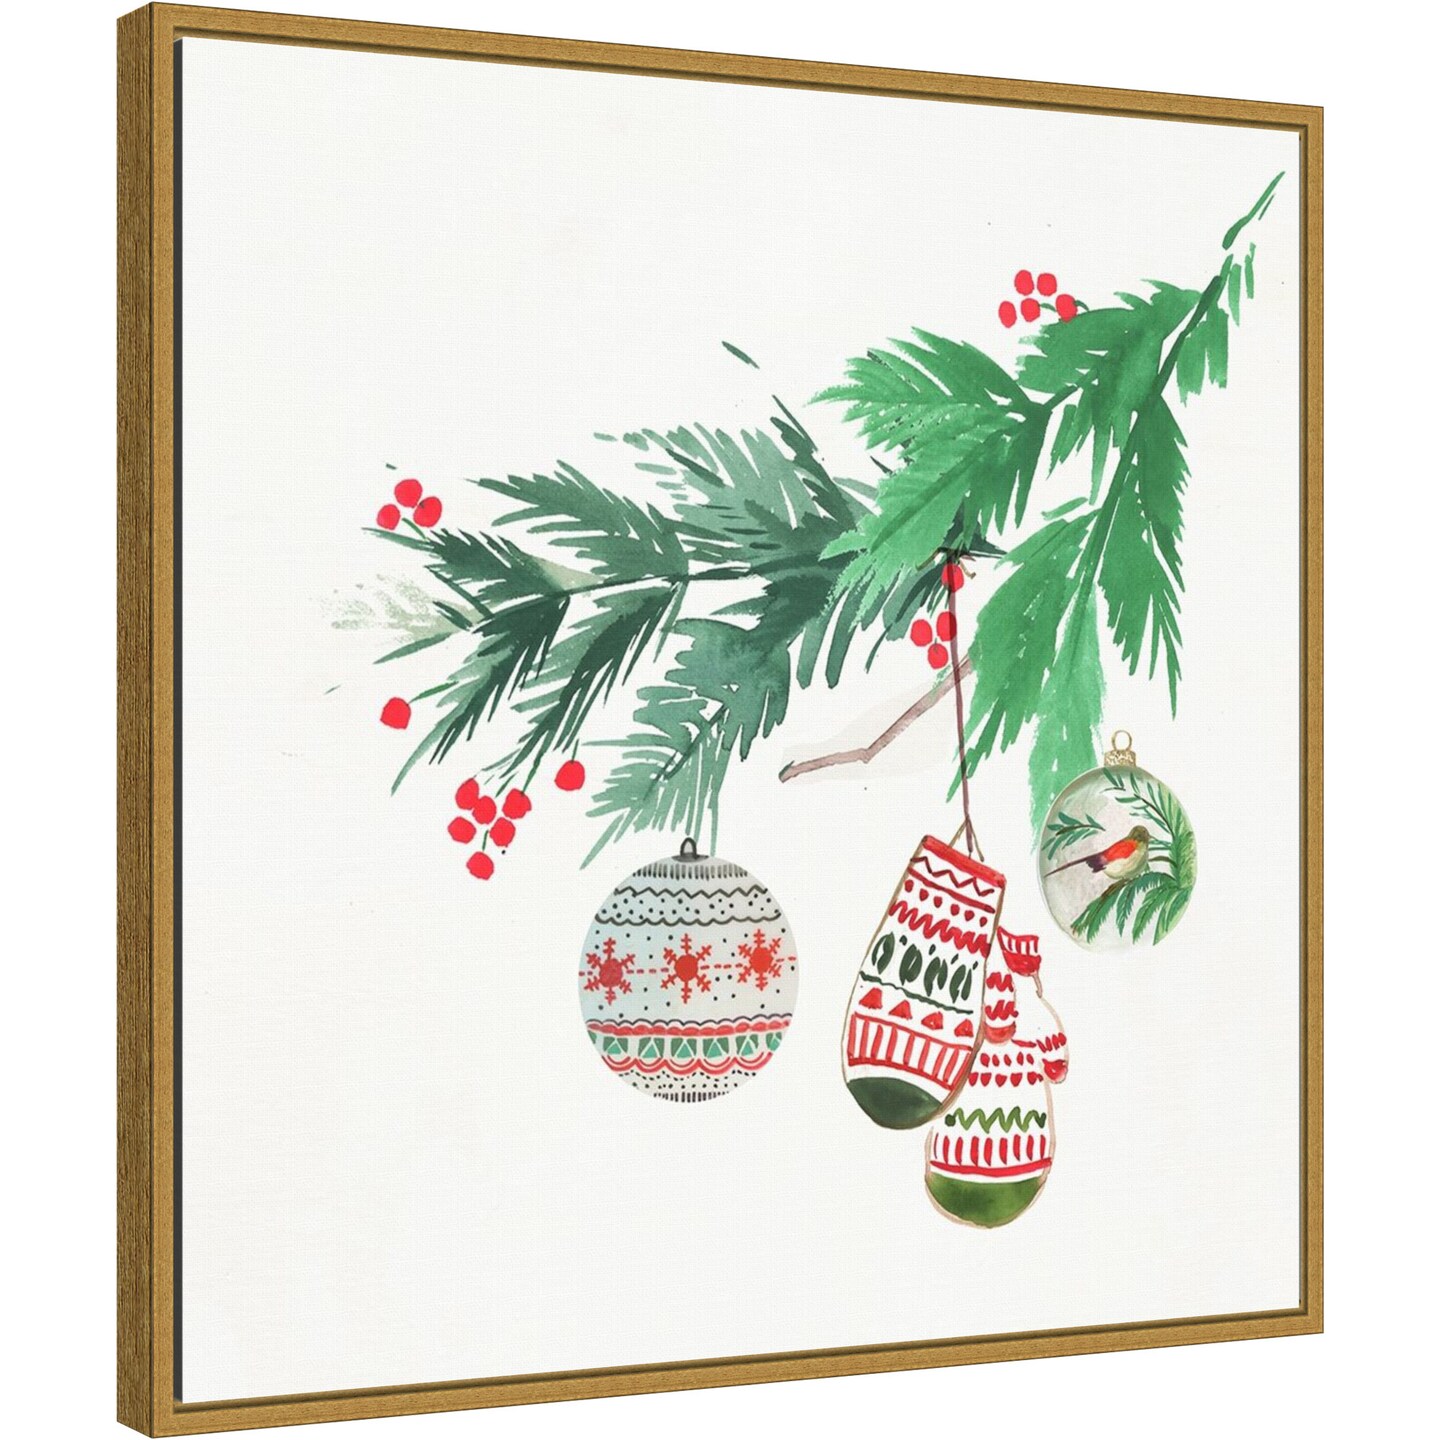 Christmas Morning by PI Studio 22-in. W x 22-in. H. Canvas Wall Art Print Framed in Gold